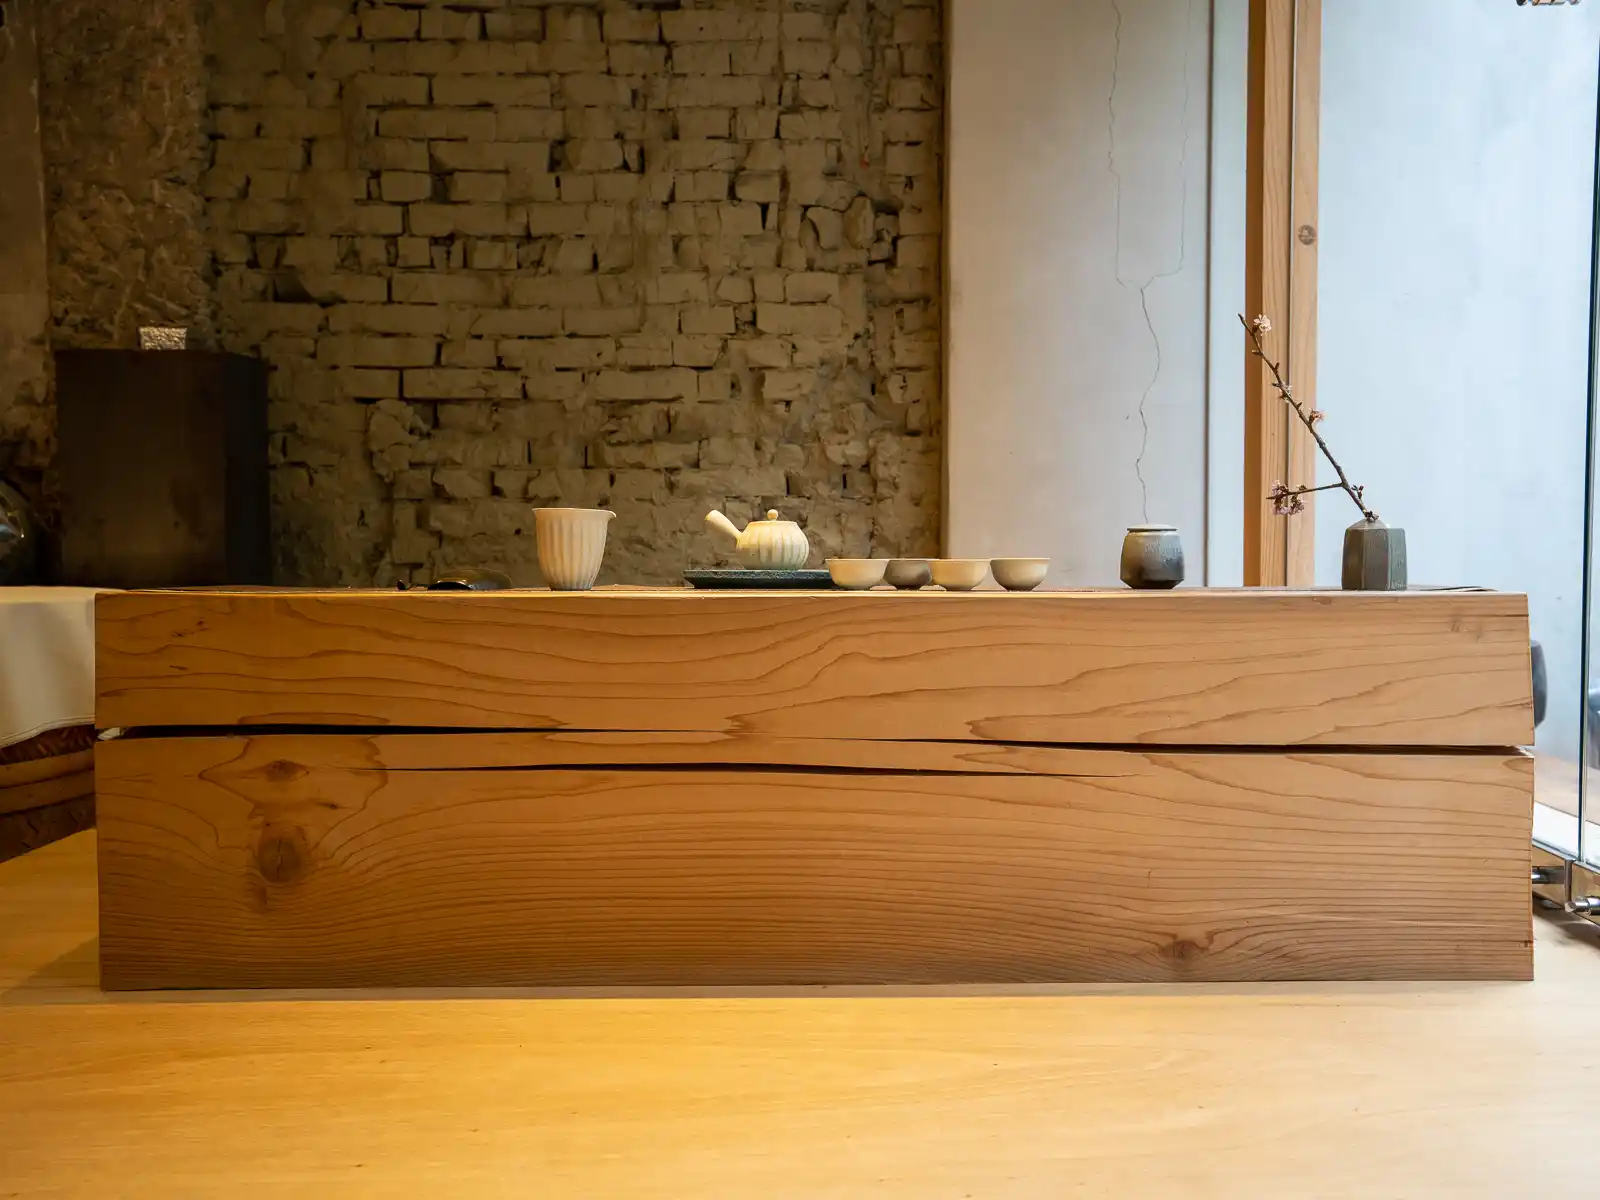 A minimalist rectangular table with a tea set in Zhao Zhao Tea Lounge.